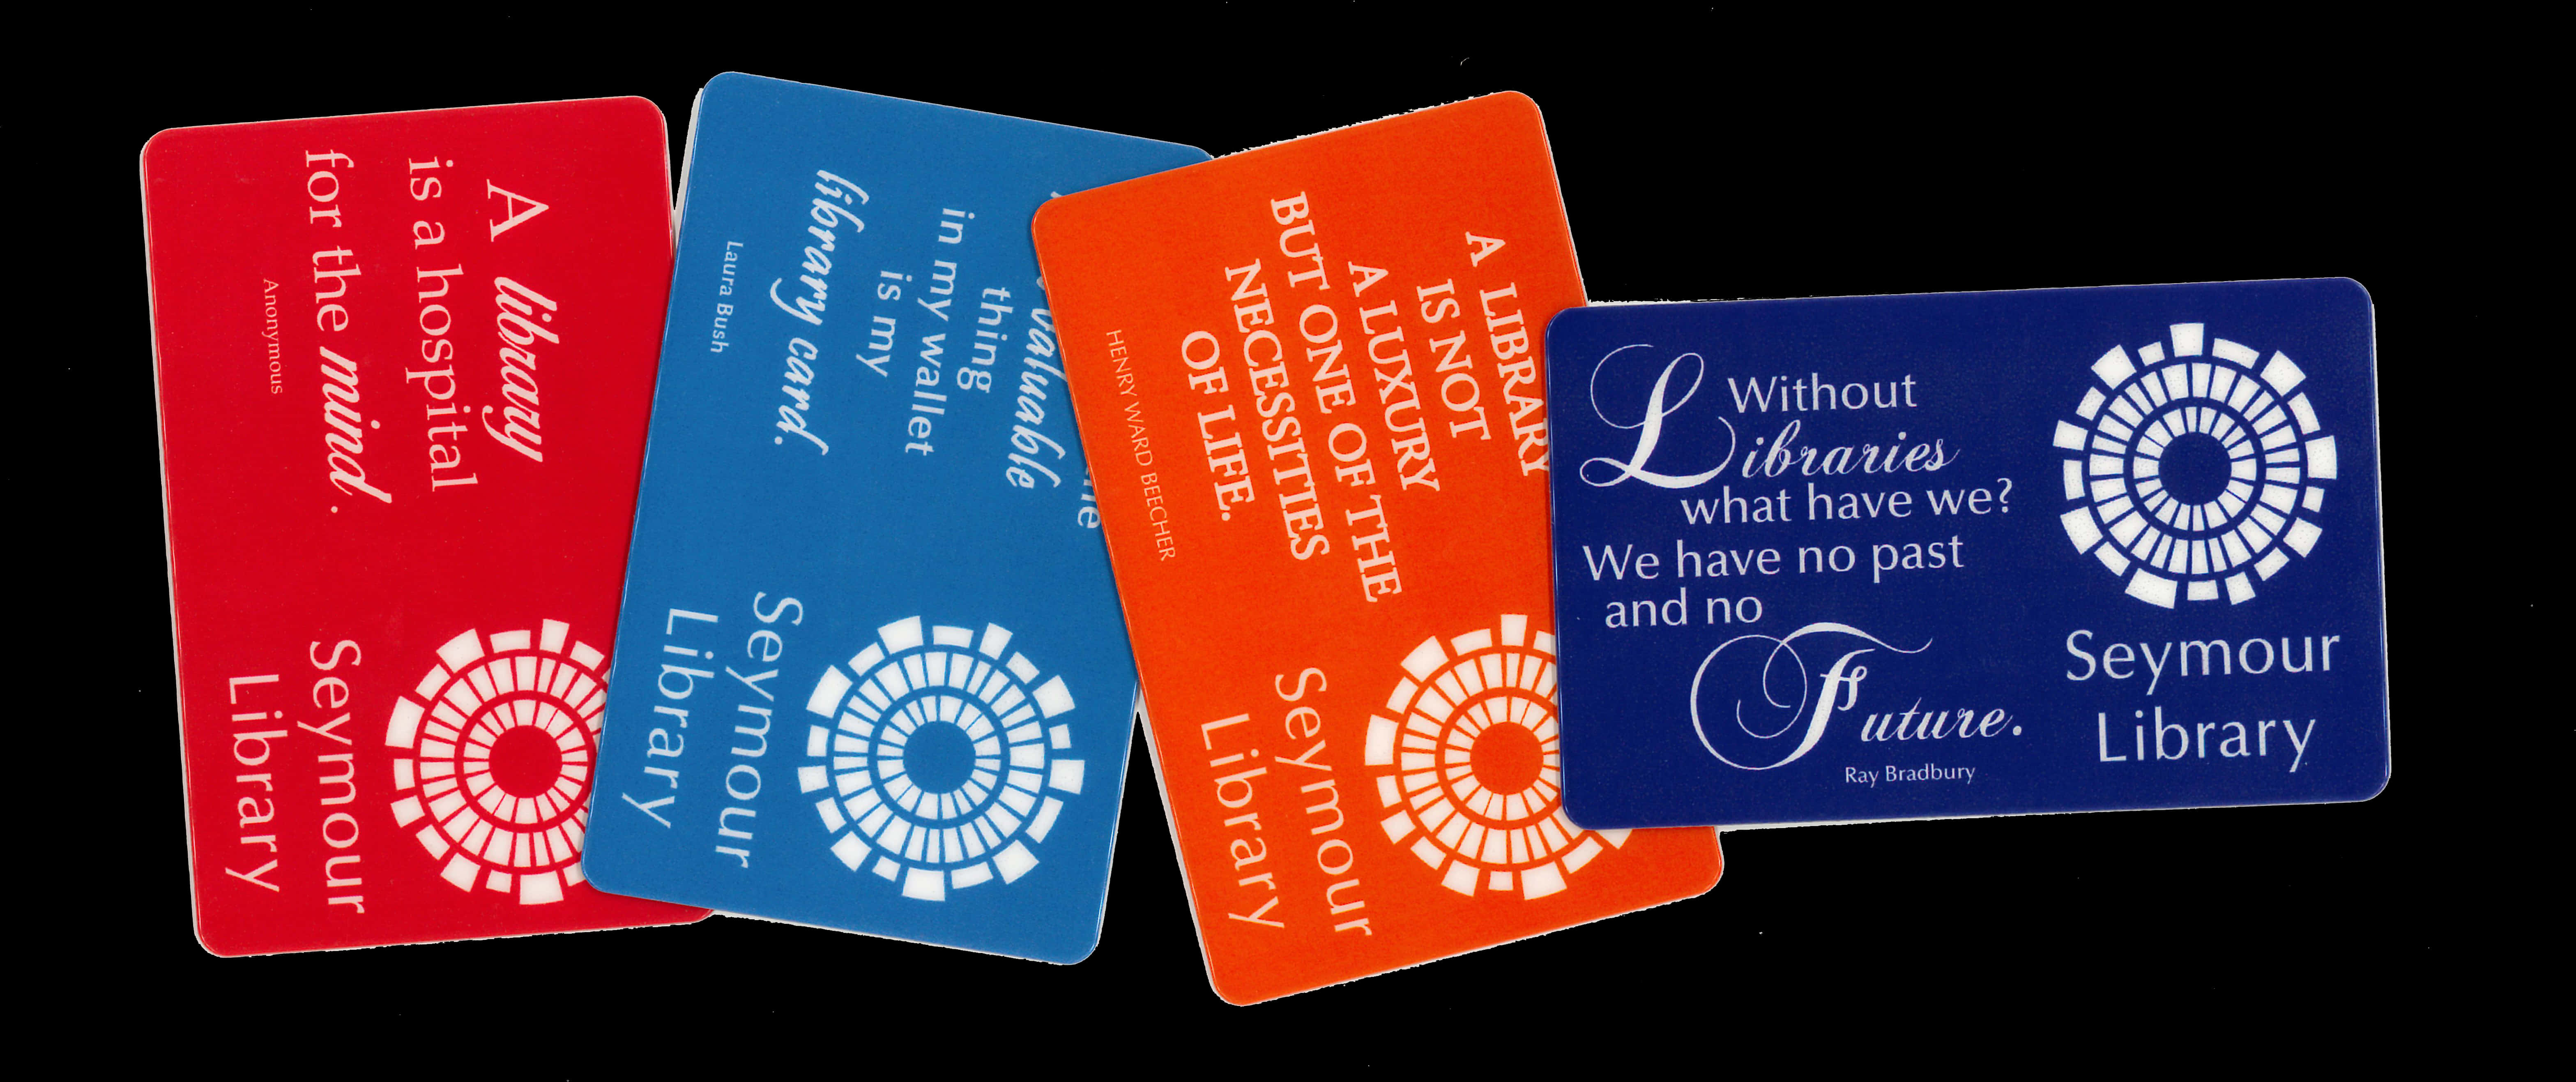 Seymour Library Card Designs PNG